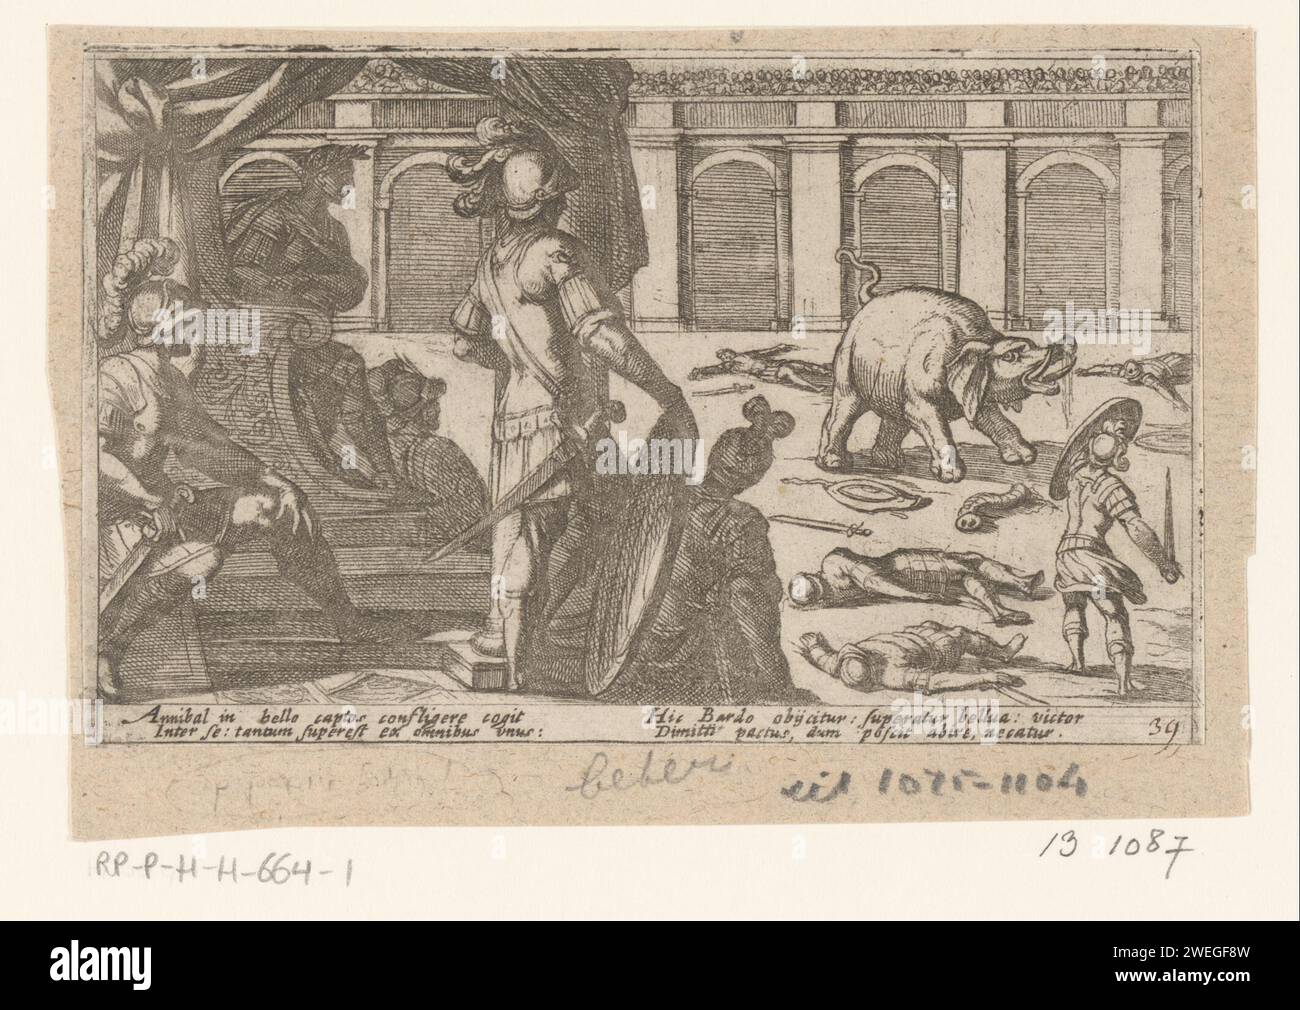 Gladiators fight with an elephant in an arena, Antonio Tempesta, 1605 print Face in an arena where a gladiator fights with an elephant. There are four dead gladiators around the elephant. In the foreground on the left, the Roman emperor is sitting on his throne. Text in Latin in STUDMARGE.  paper etching trunked animals: elephant. fight between man and animal. fight of gladiators Stock Photo